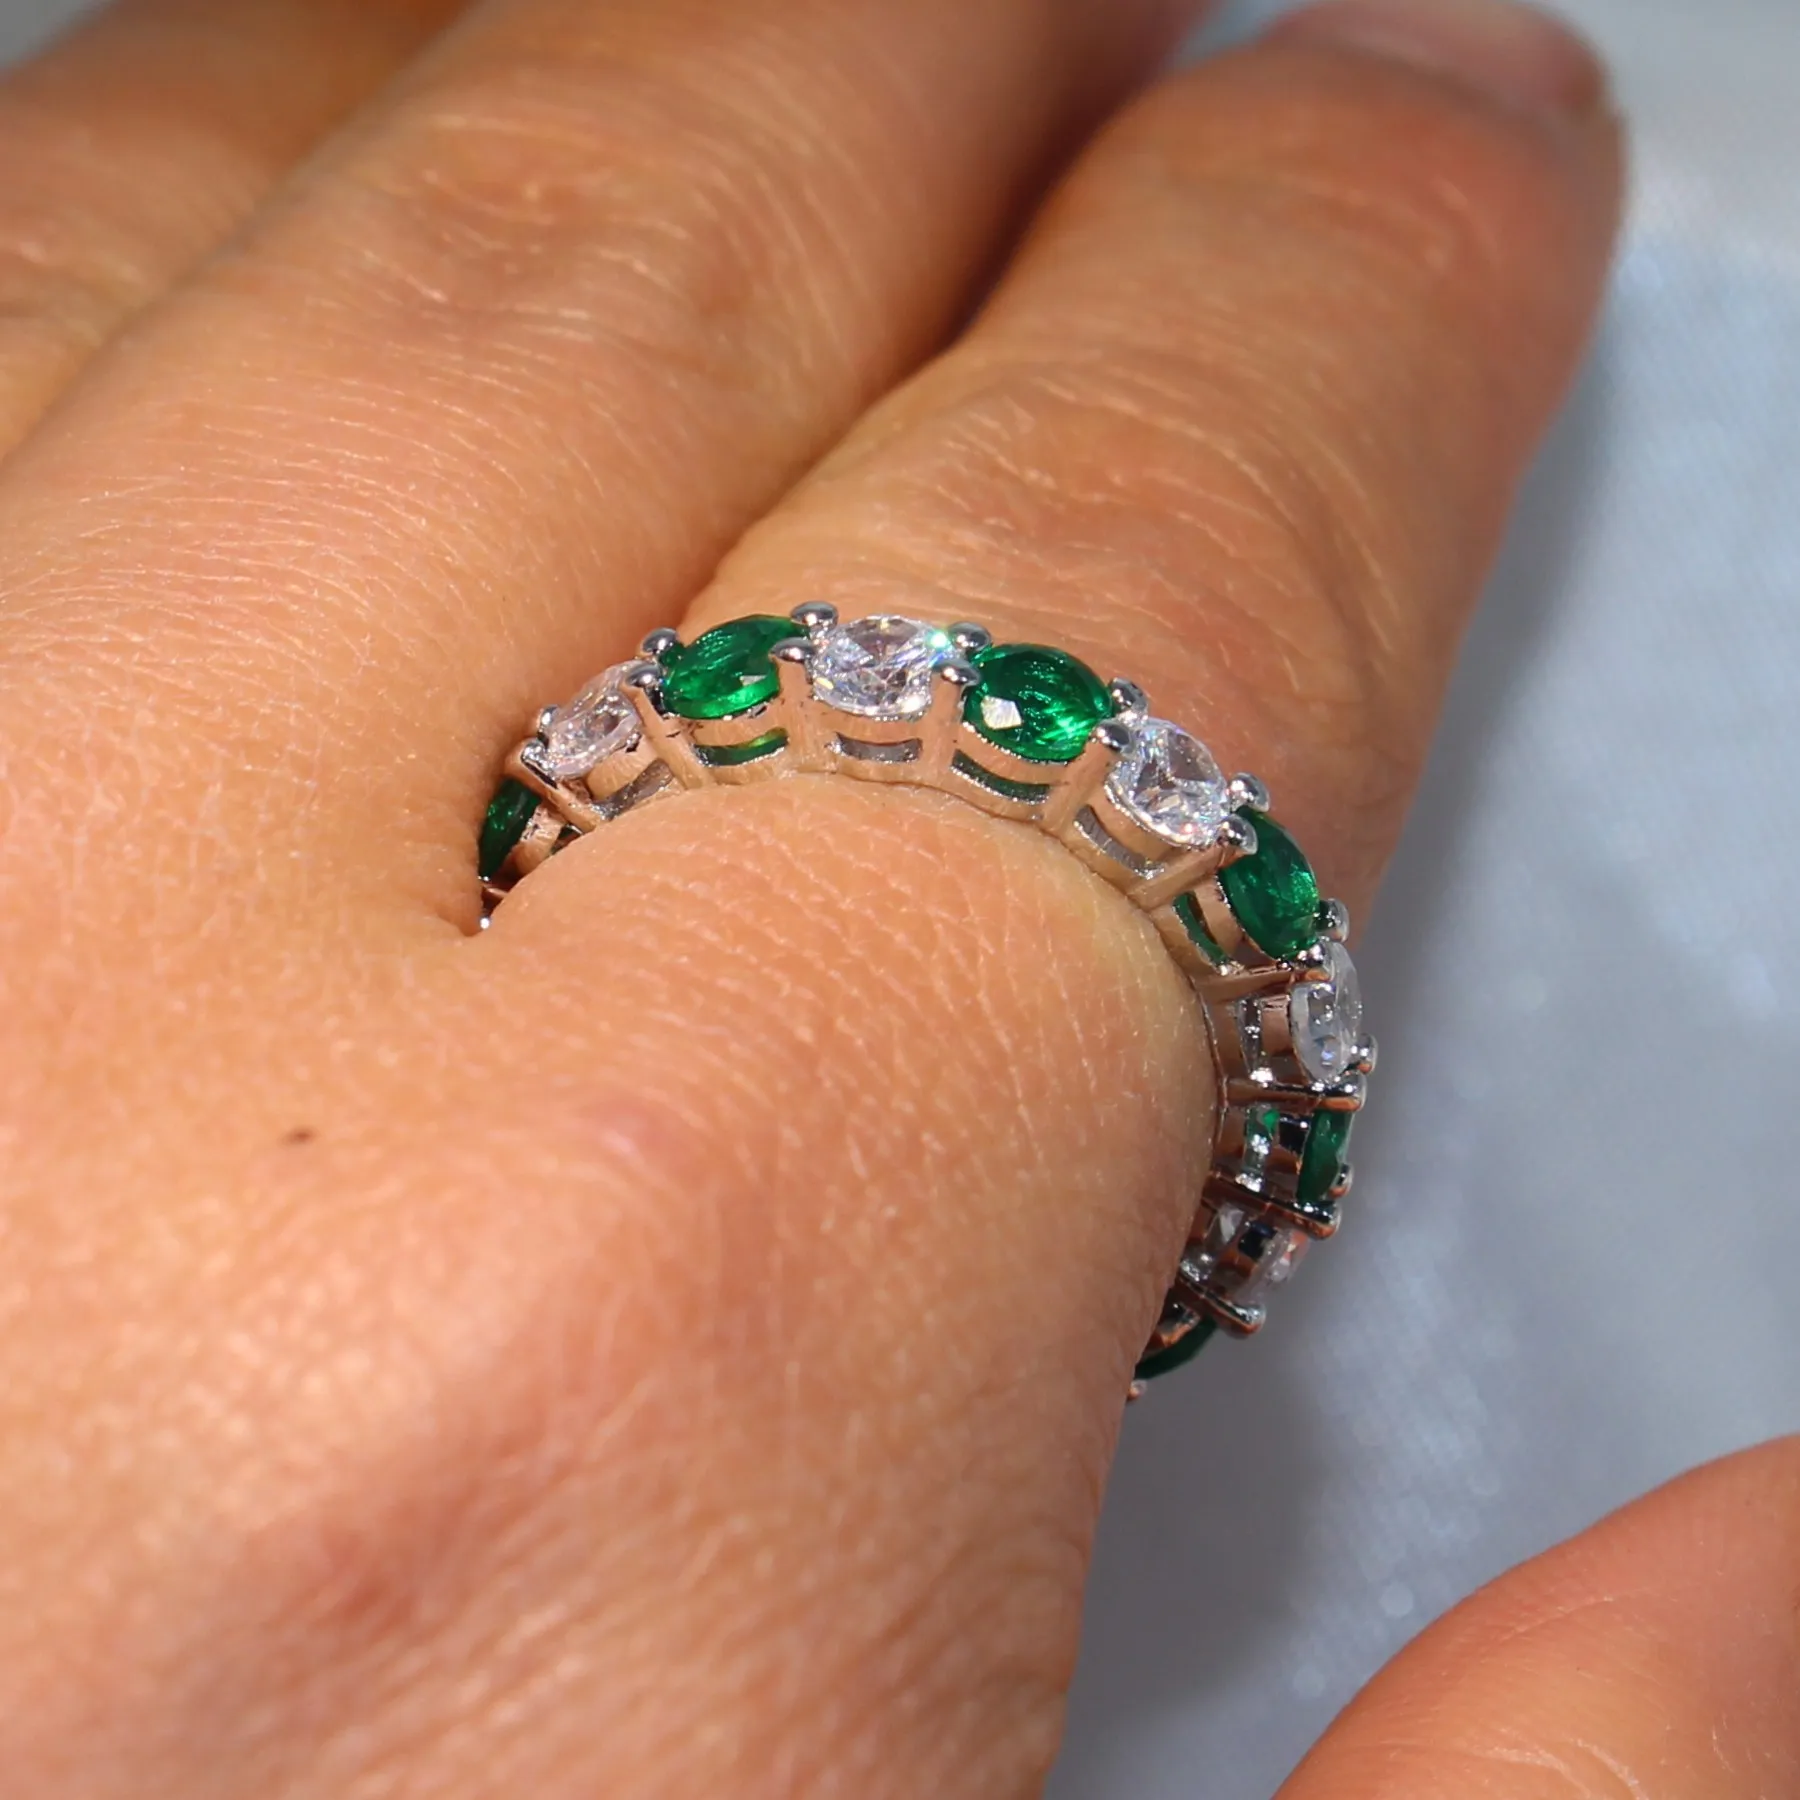 2018 Sparkling Brand New Luxury Jewelry 925 Sterling Silver Round Cut Emerald Zirconia Women Wedding Band Band Circle Ring 9383913